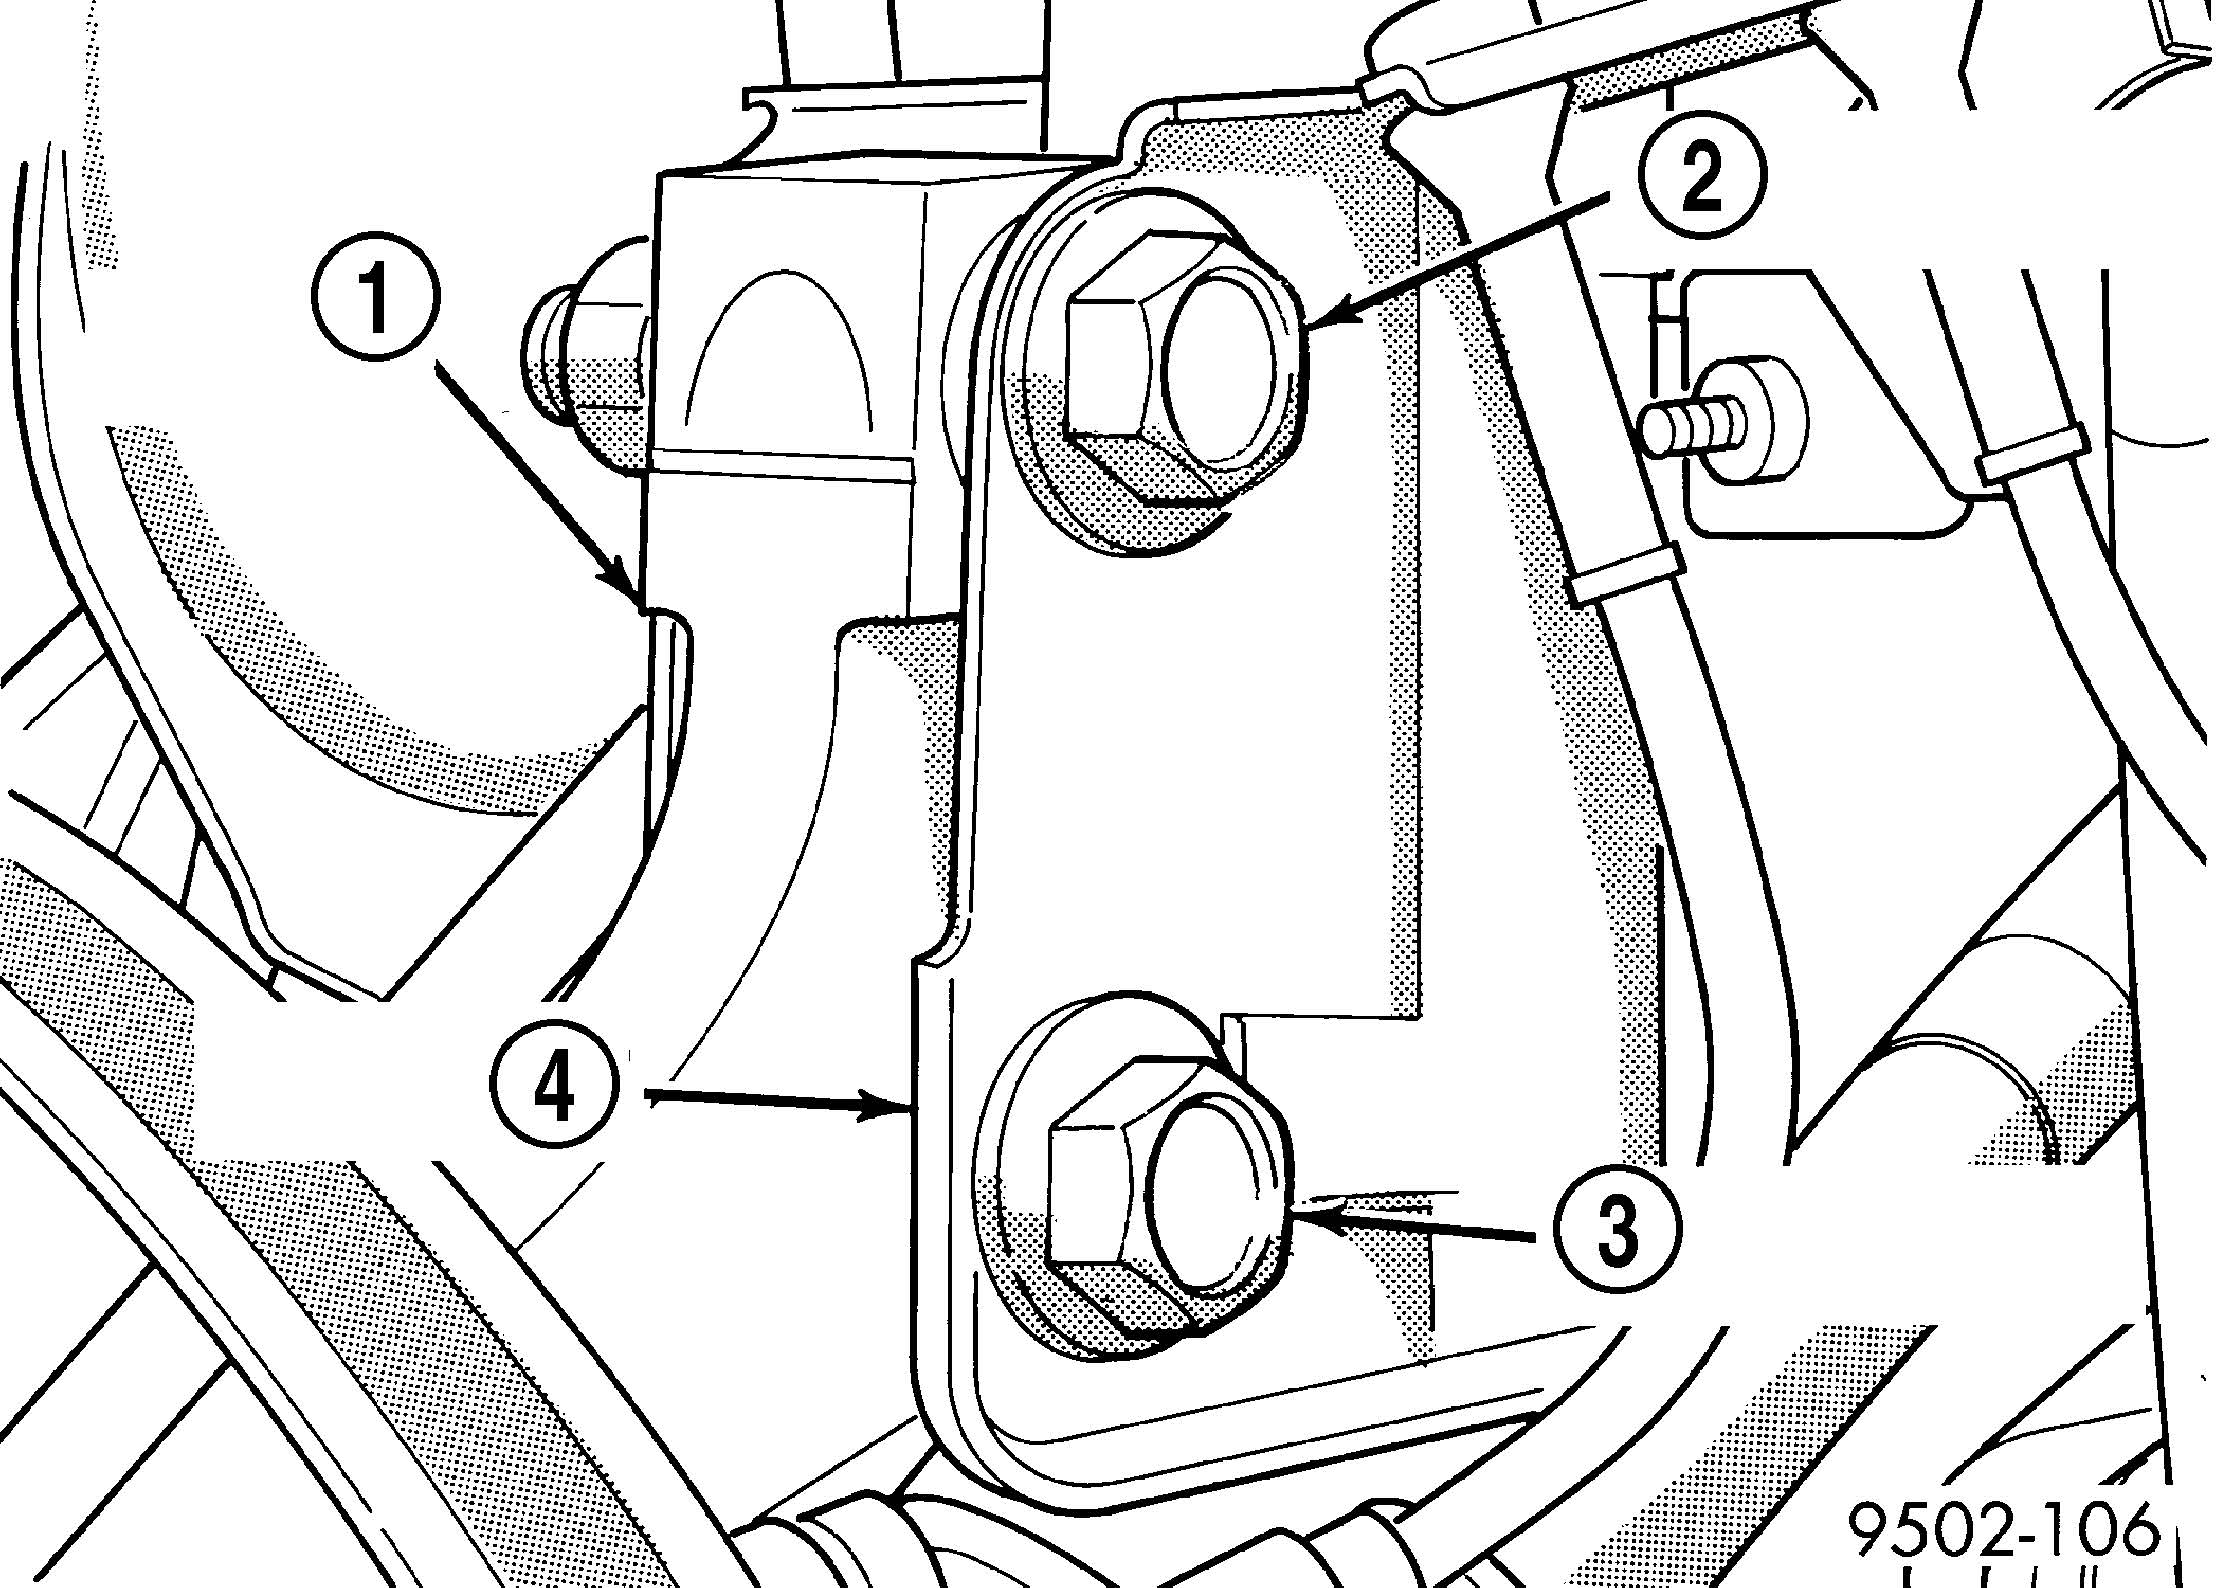 Fig. 5 Correctly Installed Eccentric Attaching Bolt